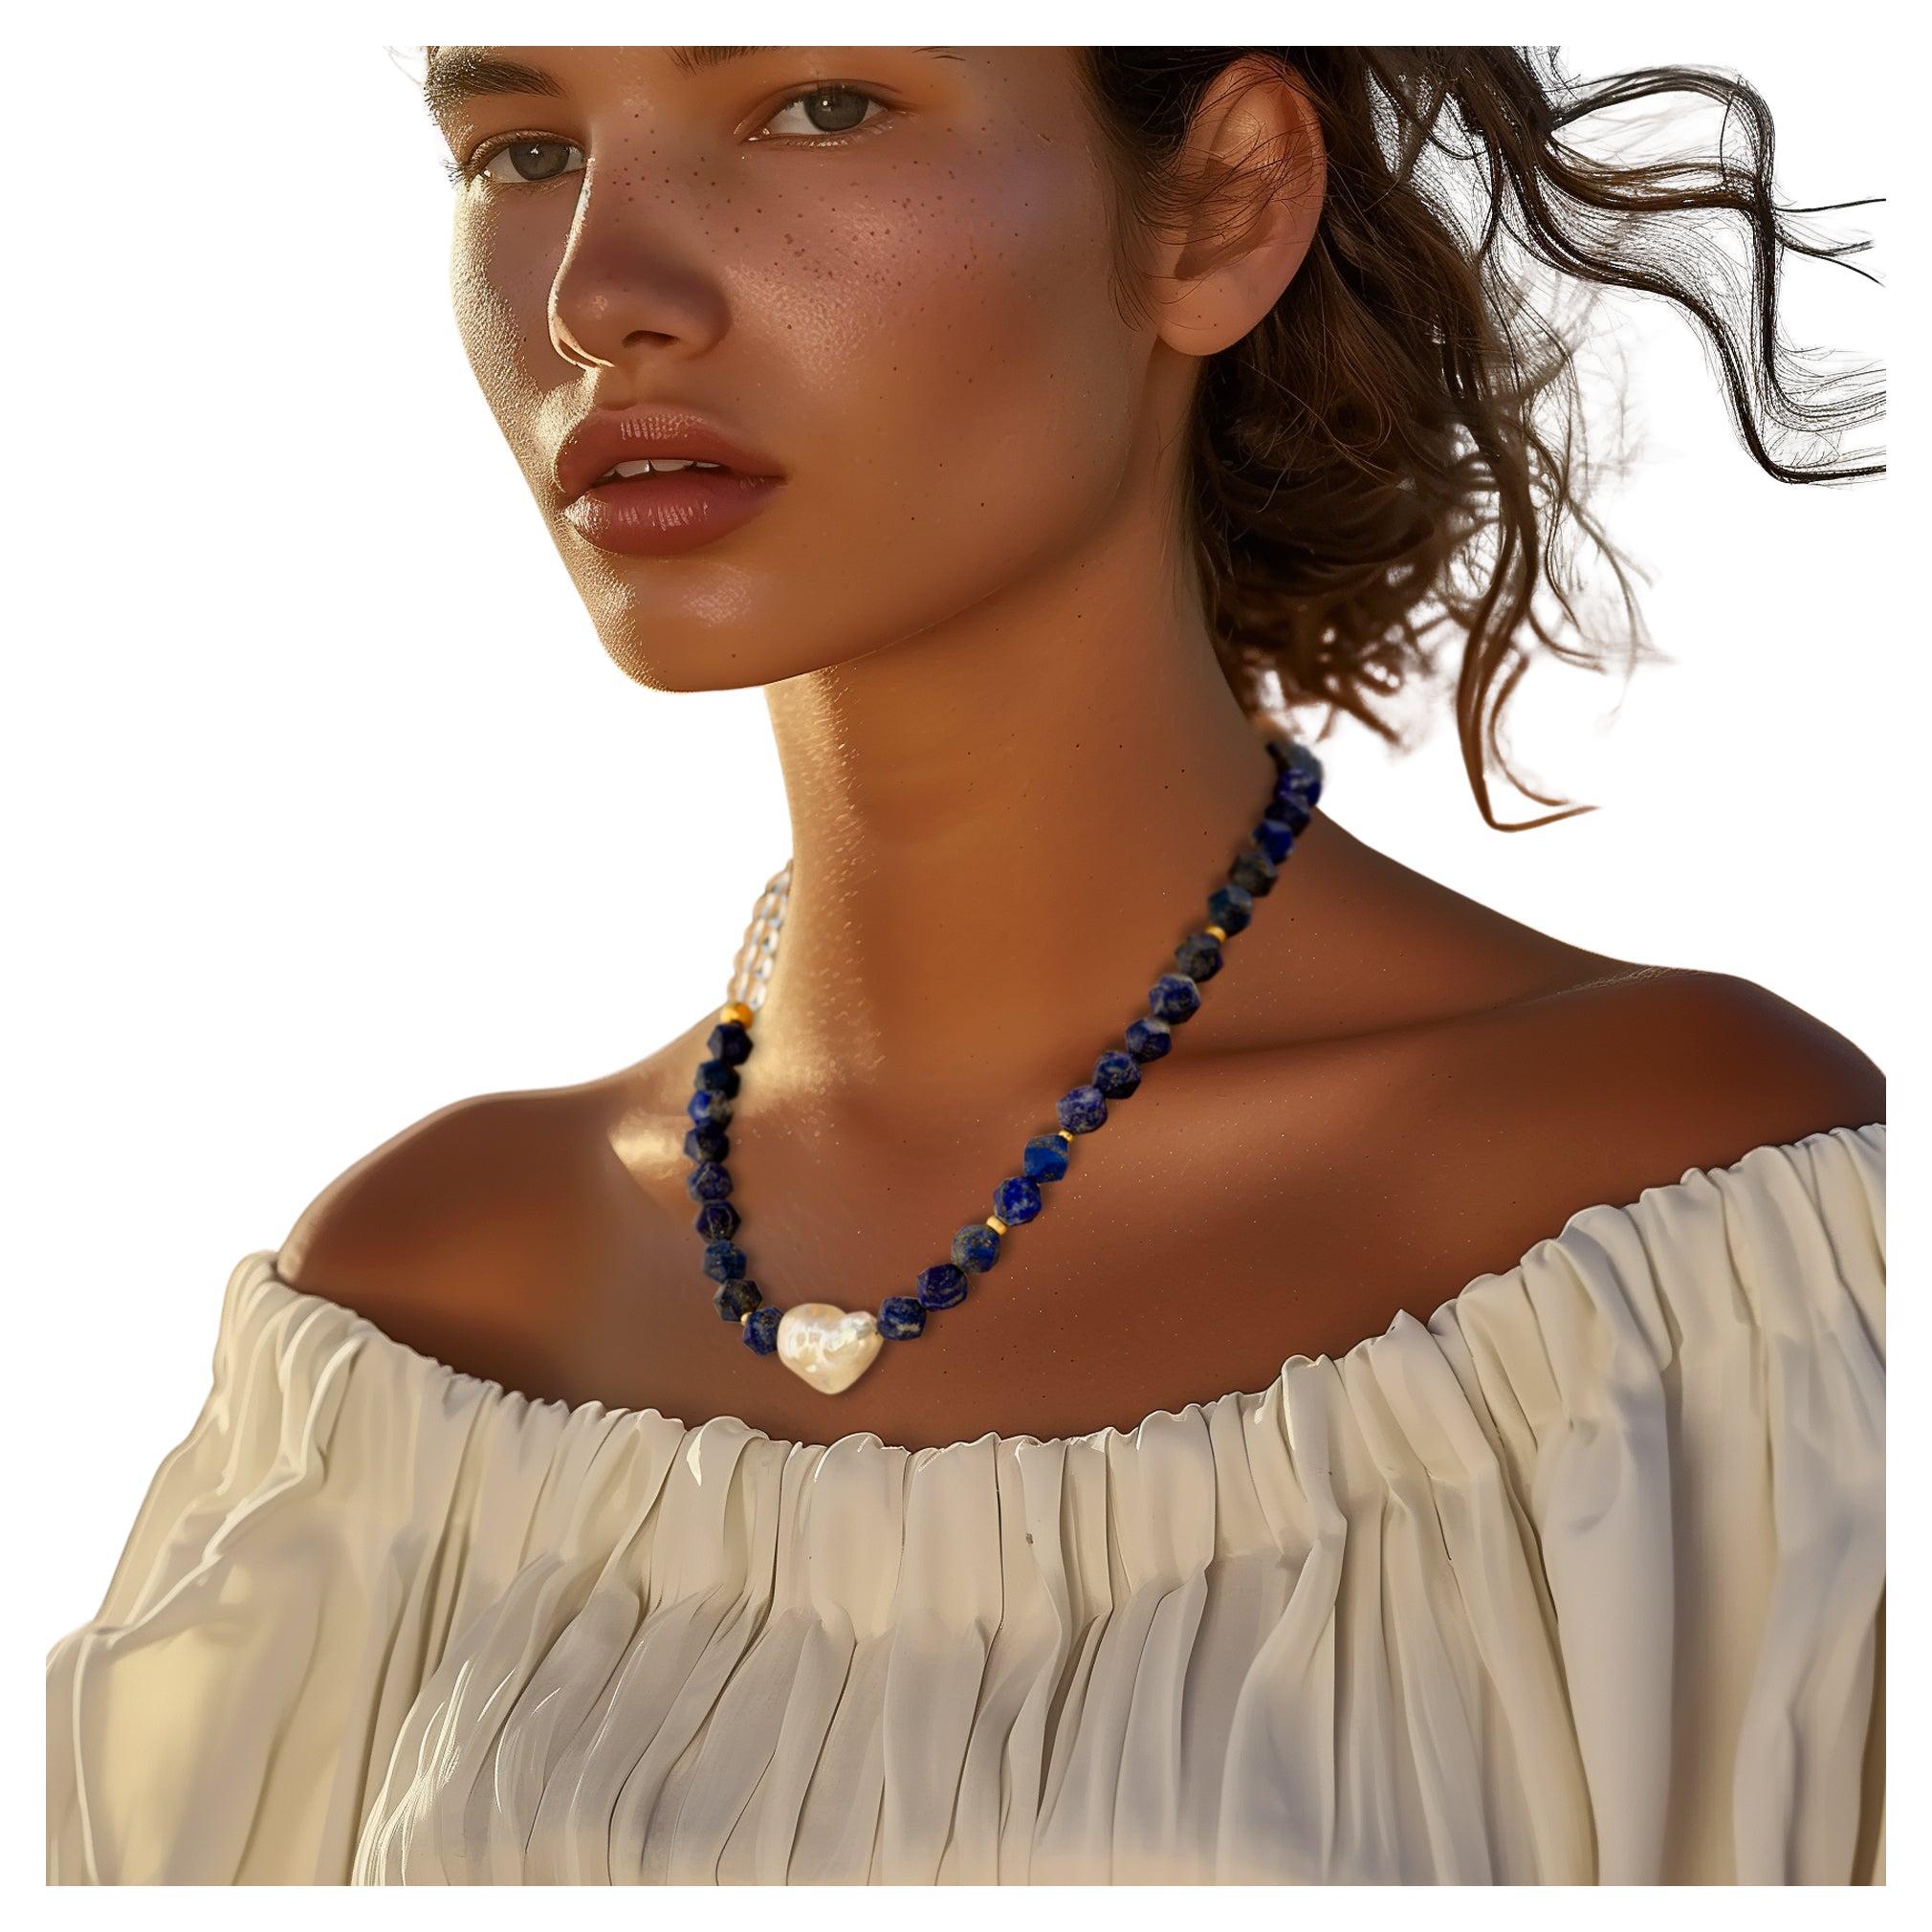 Wearing this Lapis Lazuli necklace evokes a profound sense of inner peace and empowerment, guiding you to express your true essence with clarity. It will make you feel powerful, poised, and undeniably unique.

* 18